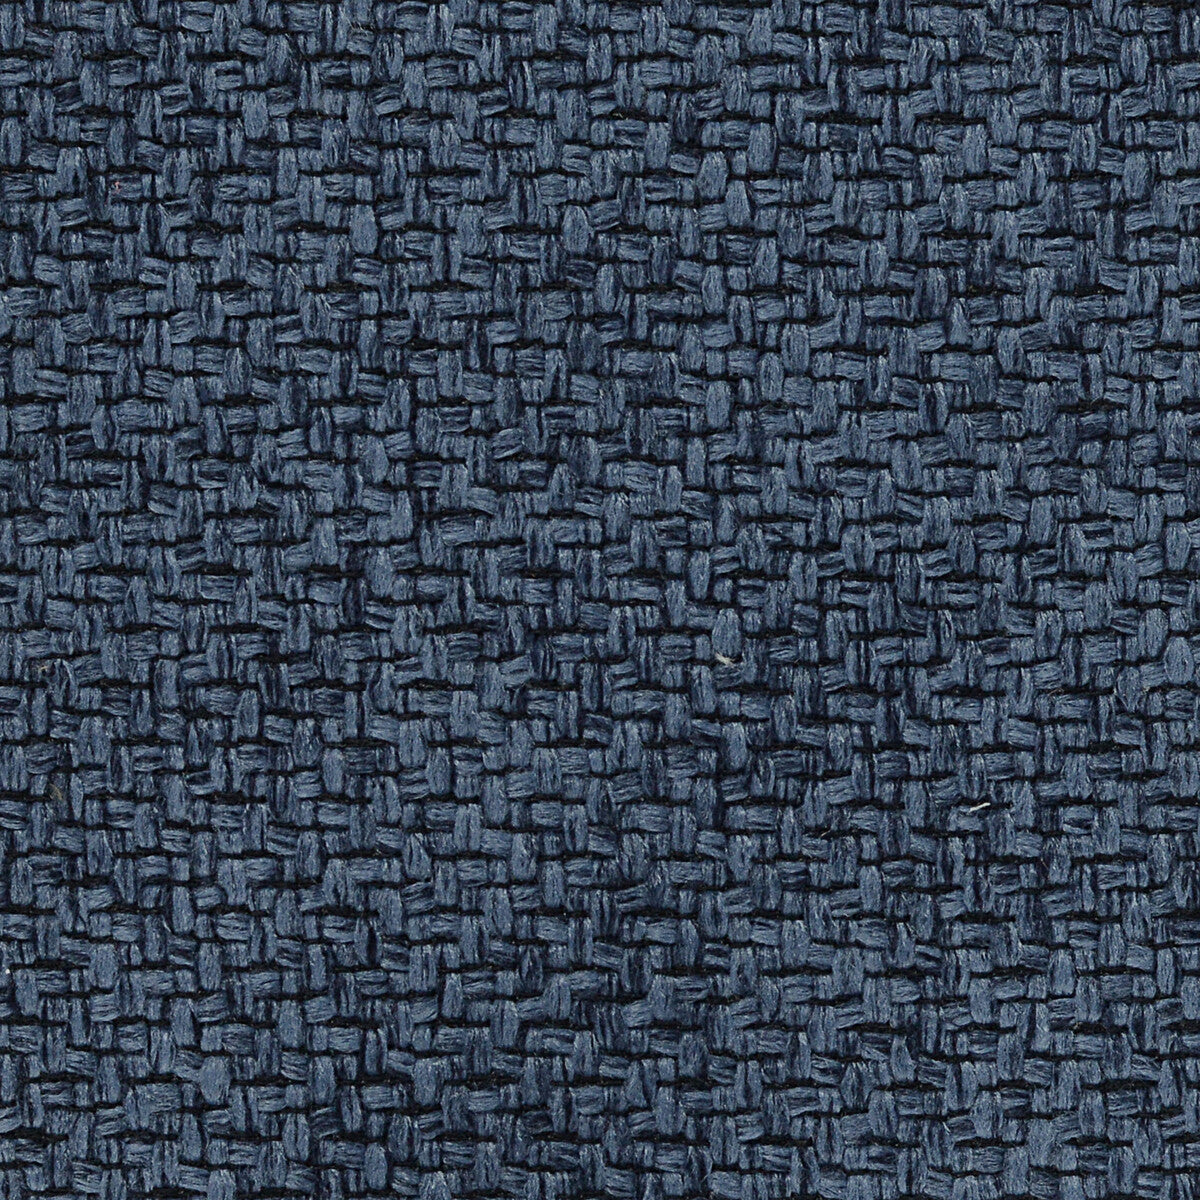 Kravet Contract fabric in 35180-5 color - pattern 35180.5.0 - by Kravet Contract